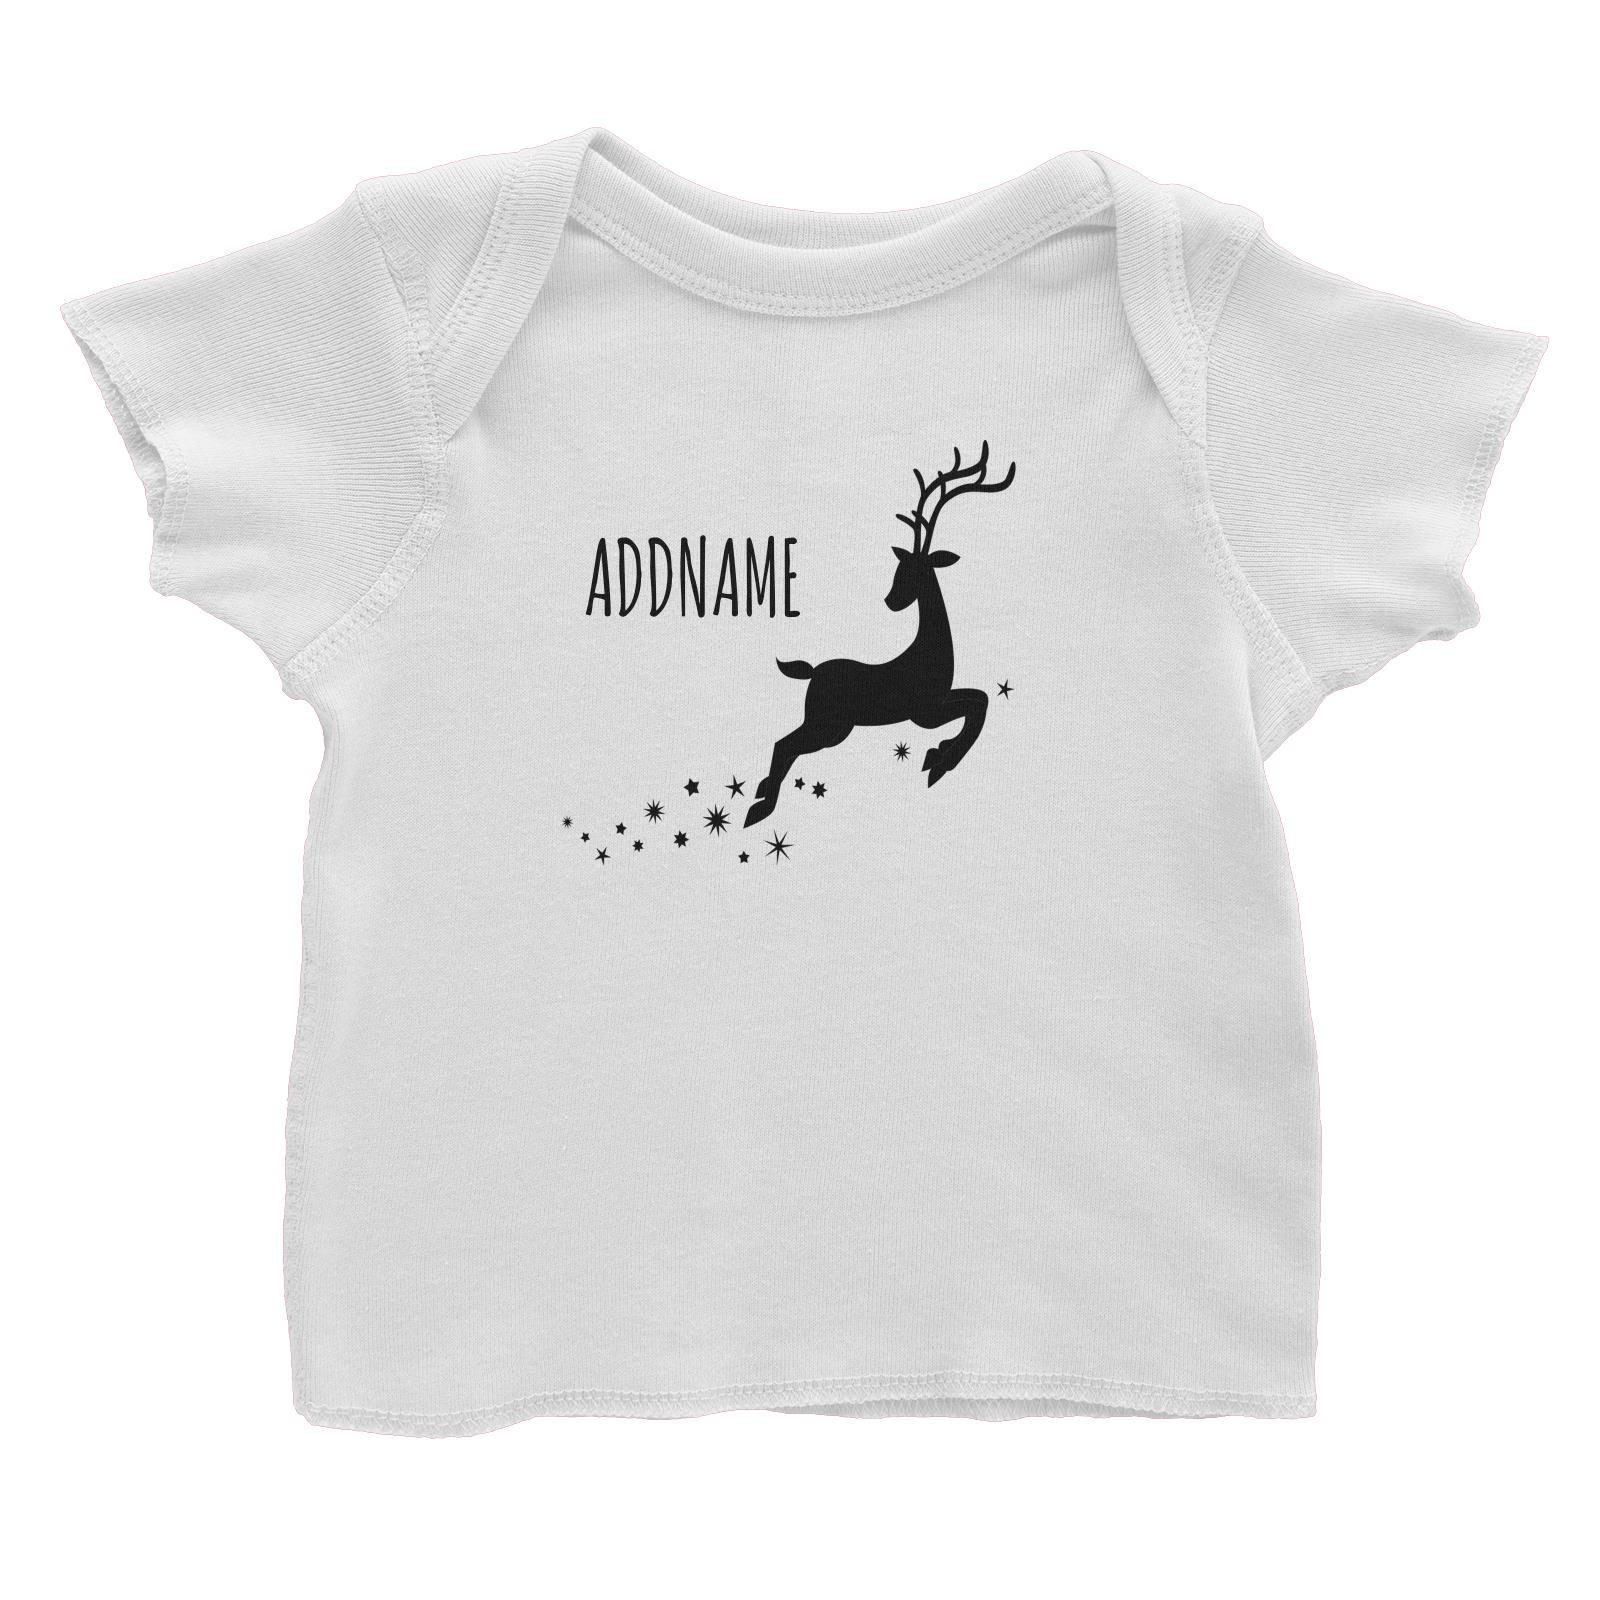 Flying Reindeer Silhouette Addname Baby T-Shirt Christmas Personalizable Designs Animal Matching Family